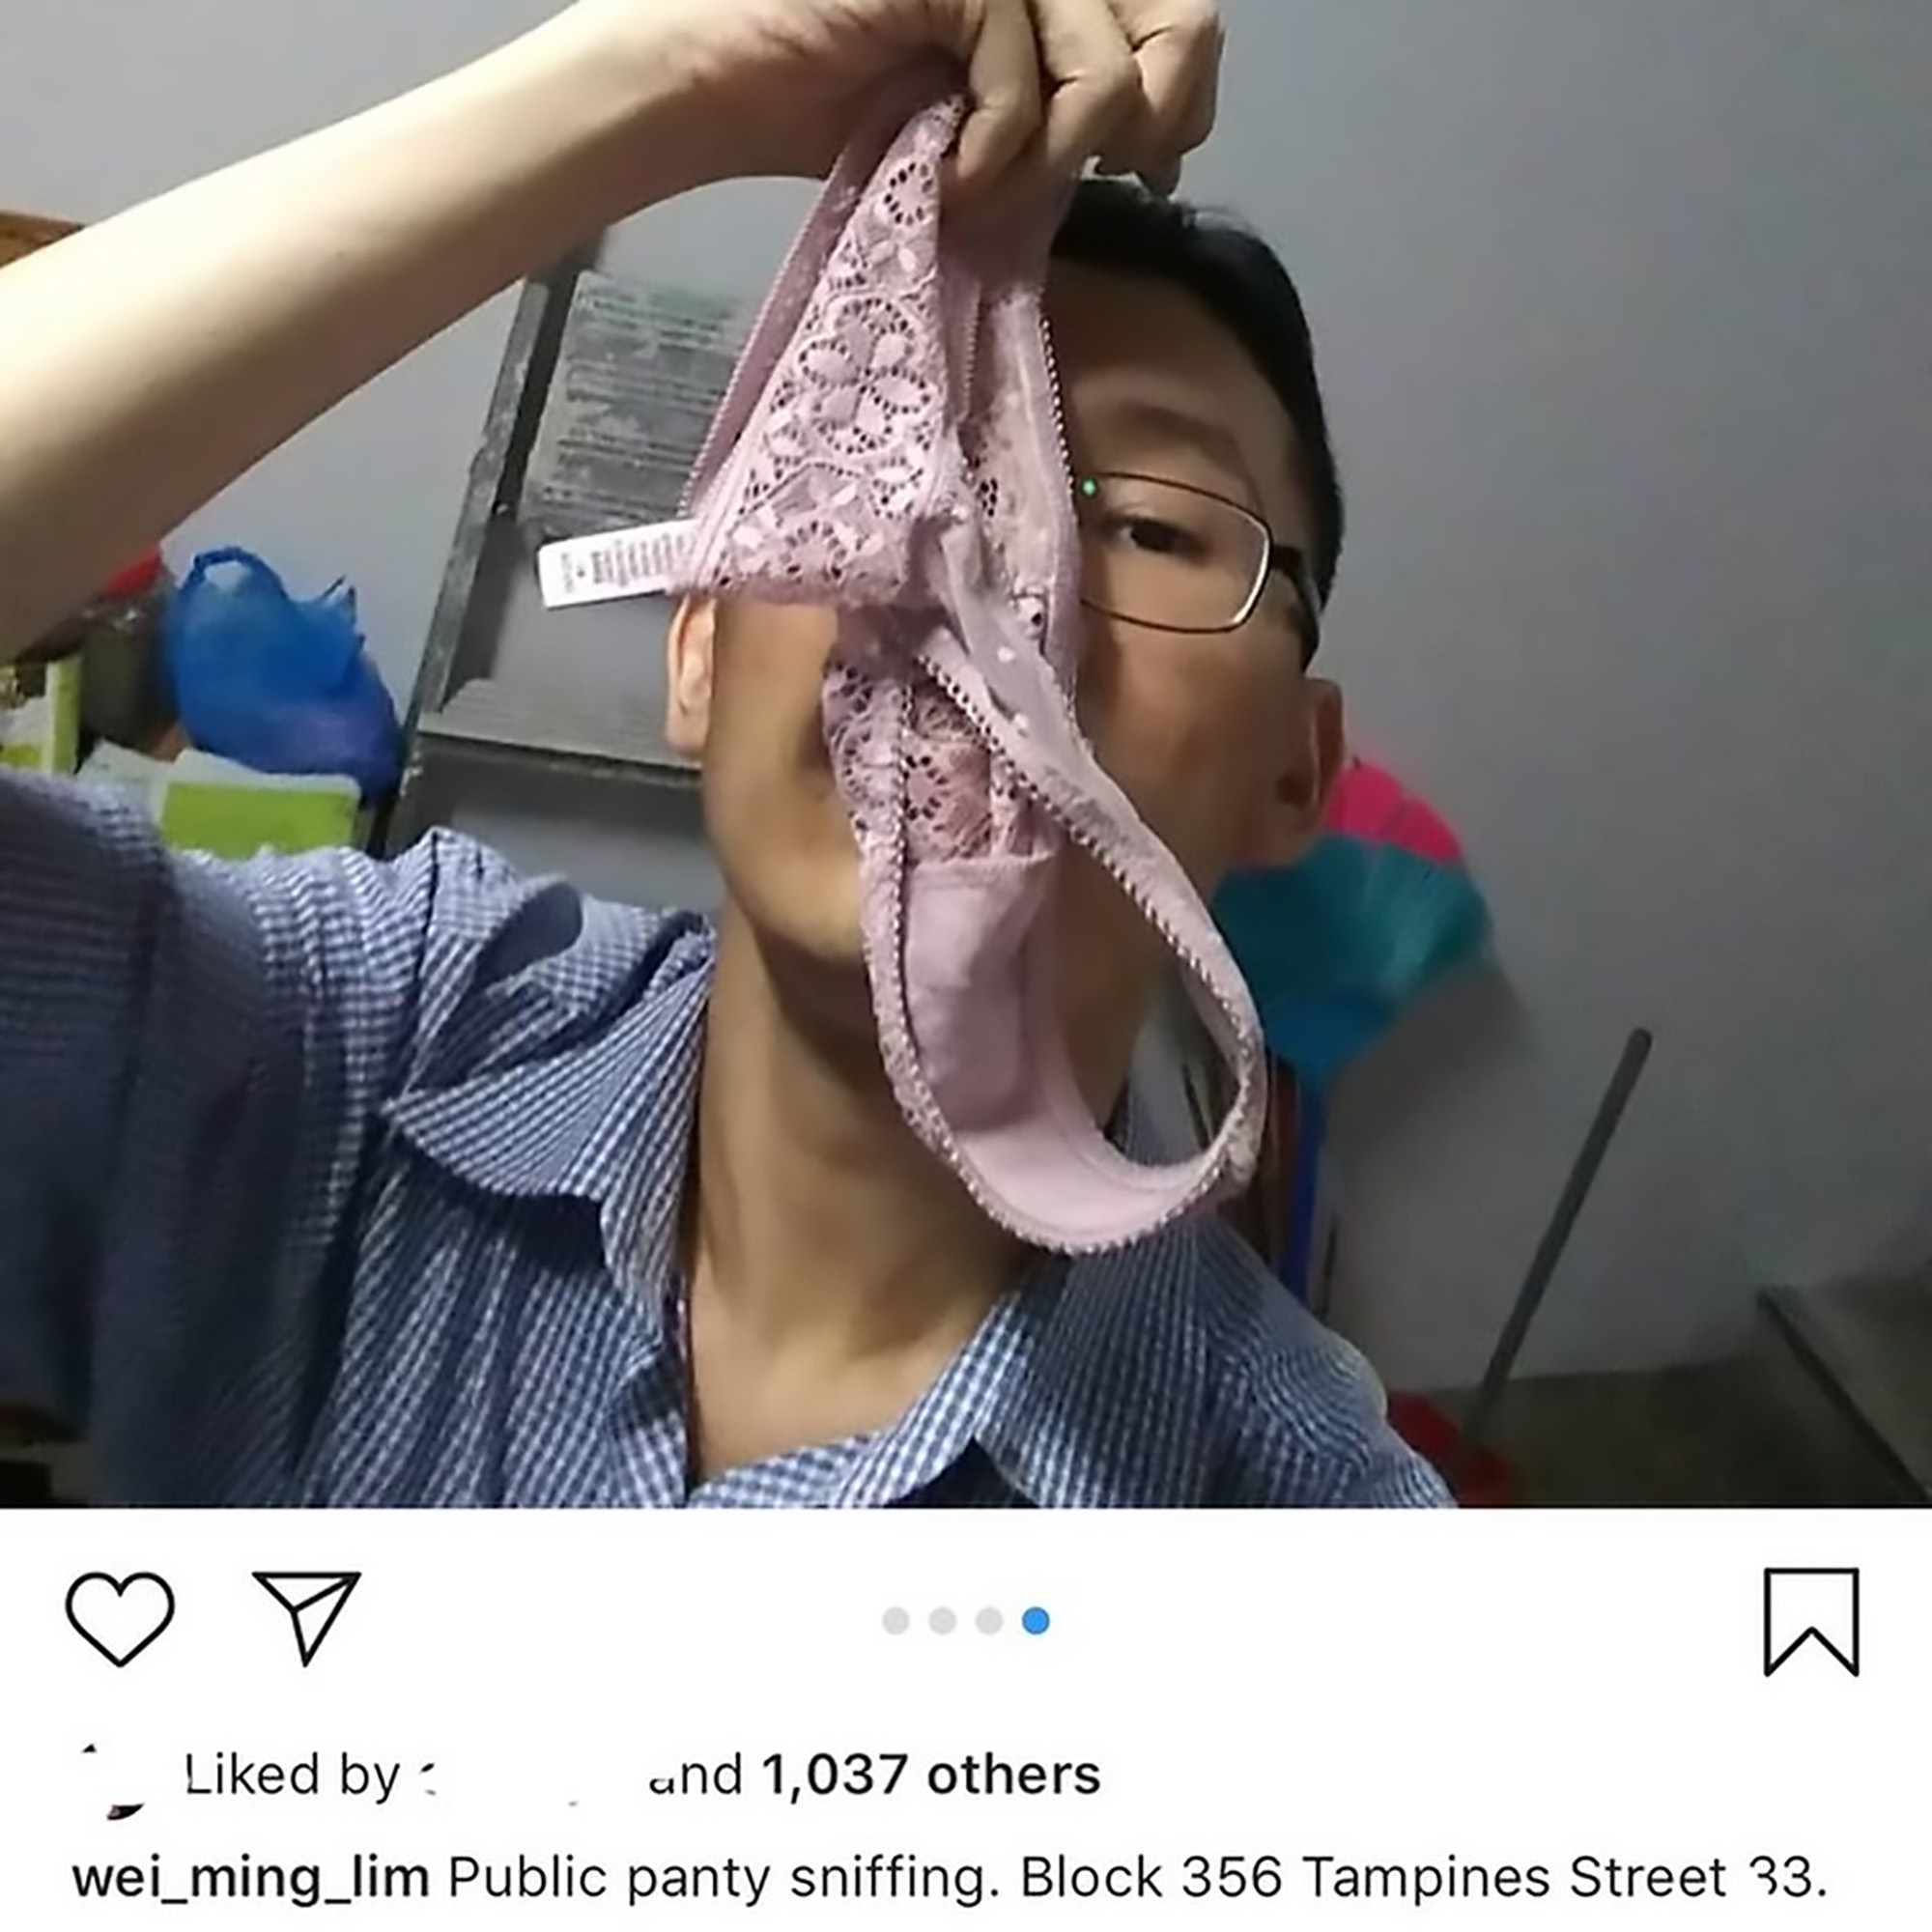 Insta Perv Nicked For Sniffing Stolen Undies For Snaps 